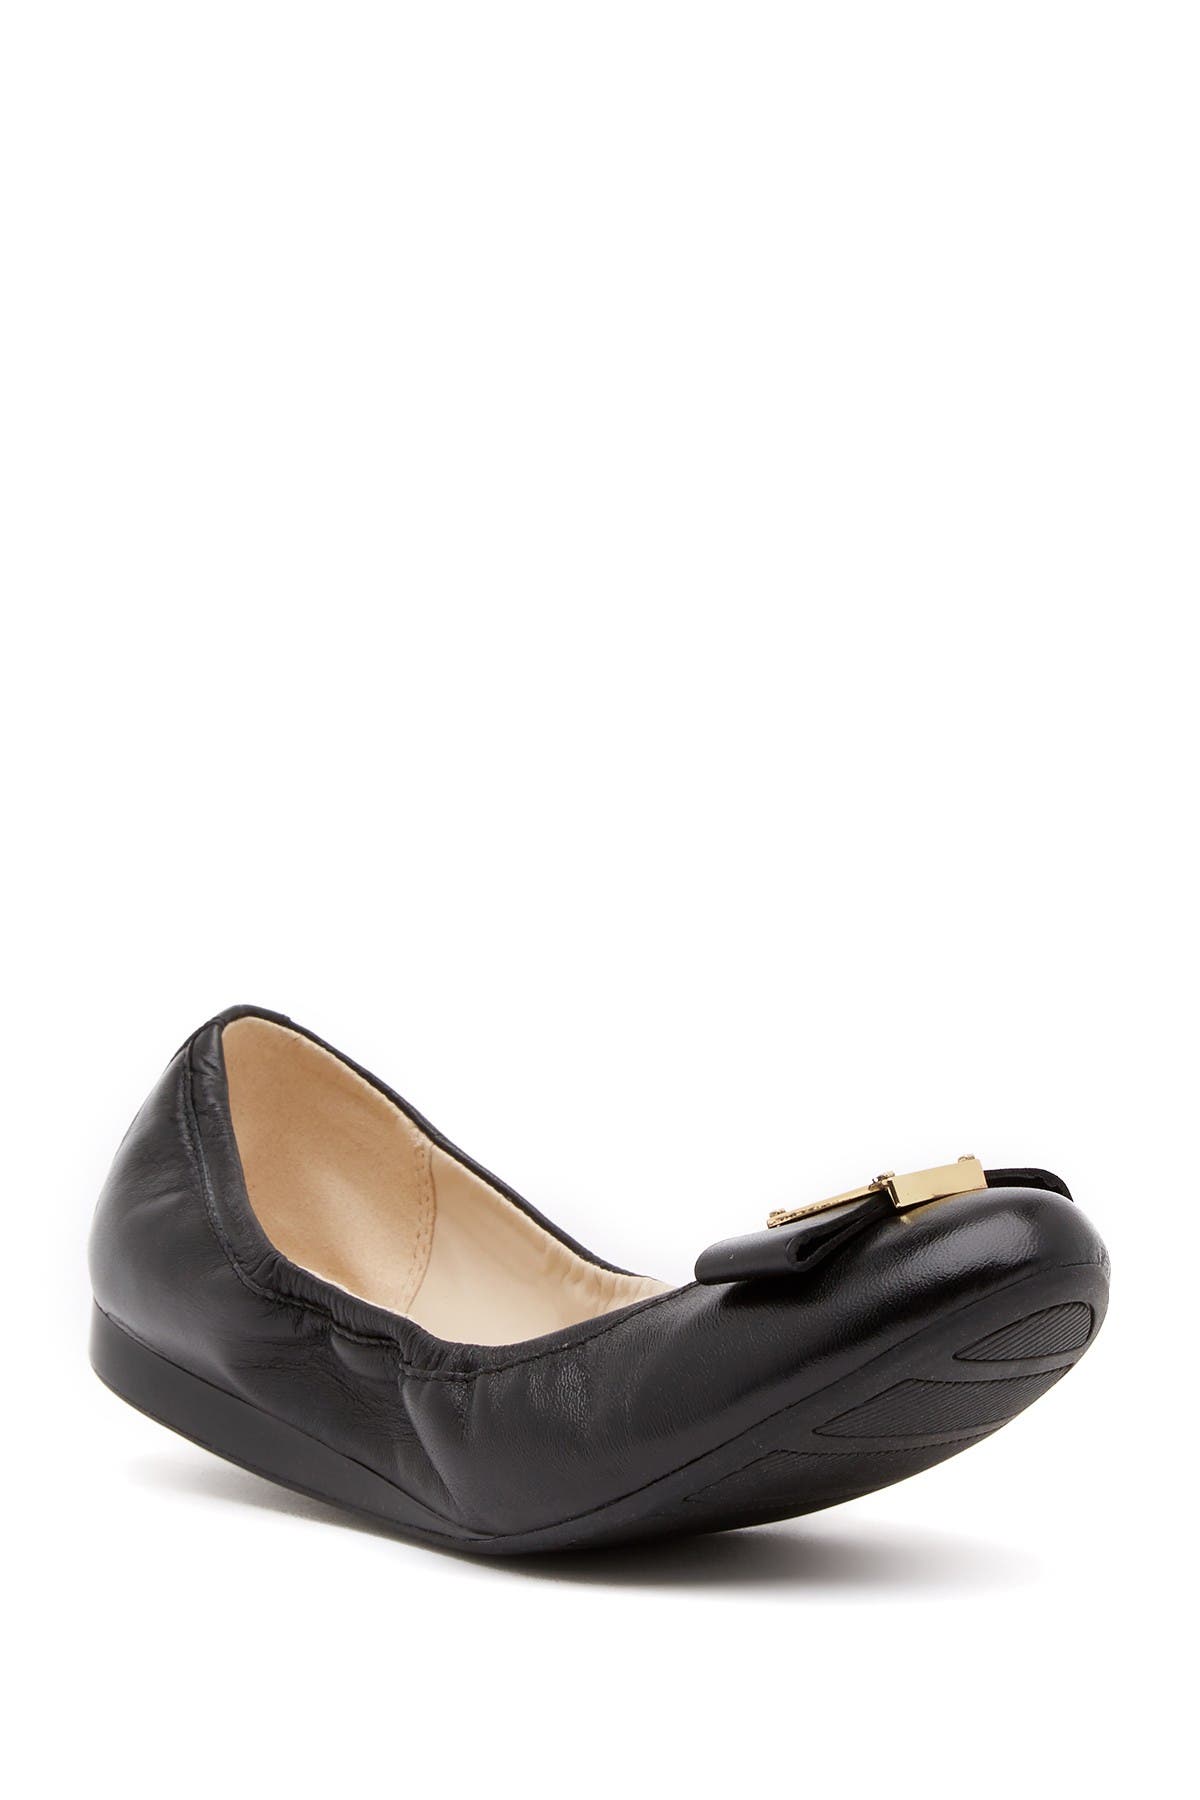 cole haan leather flats